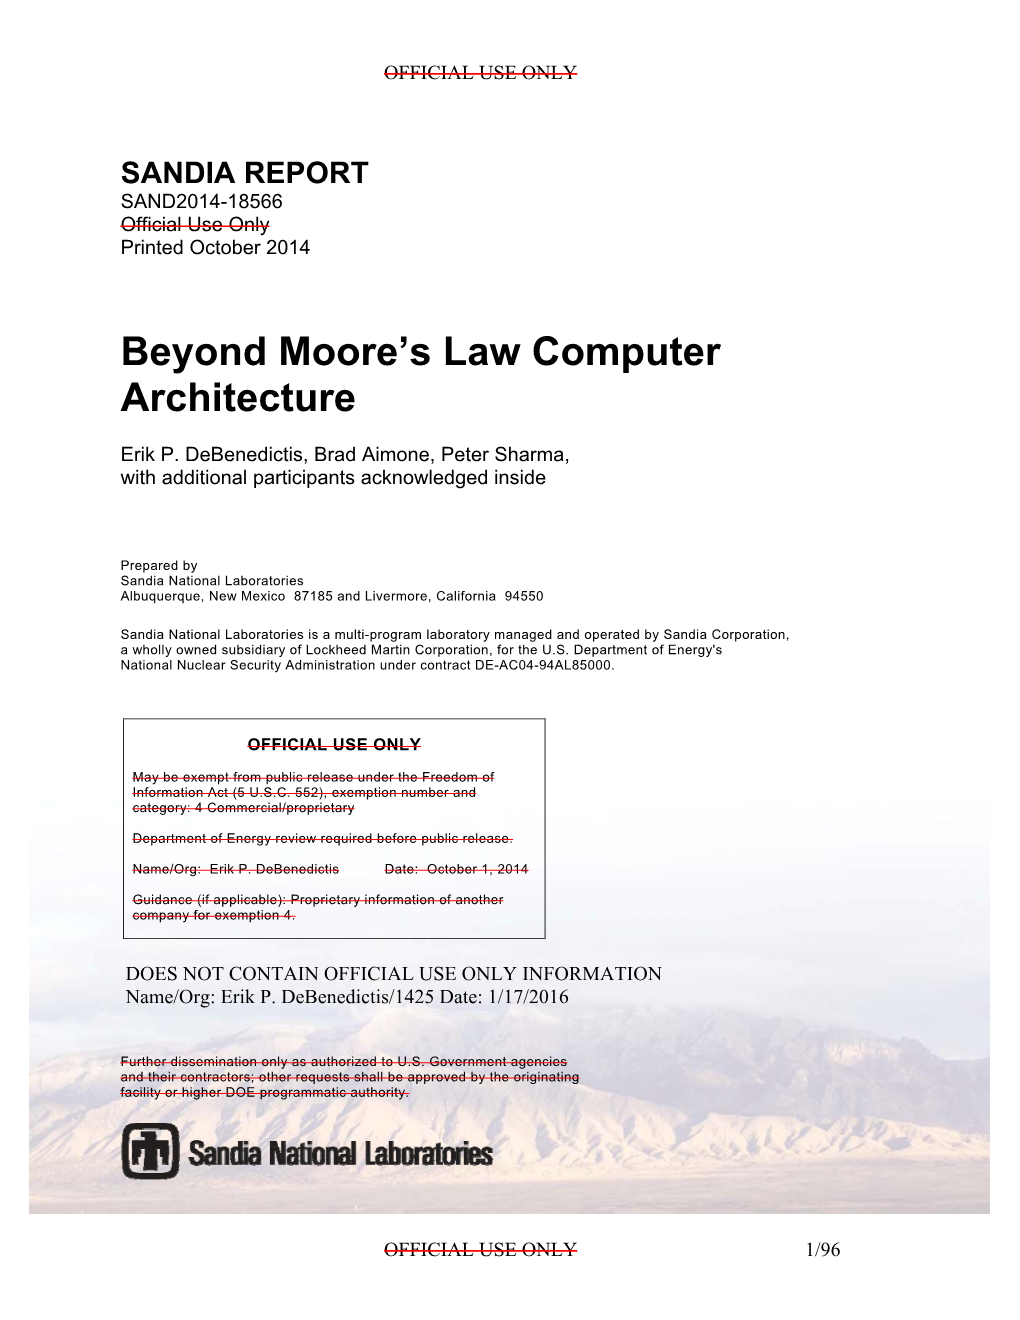 Beyond Moore's Law Computer Architecture